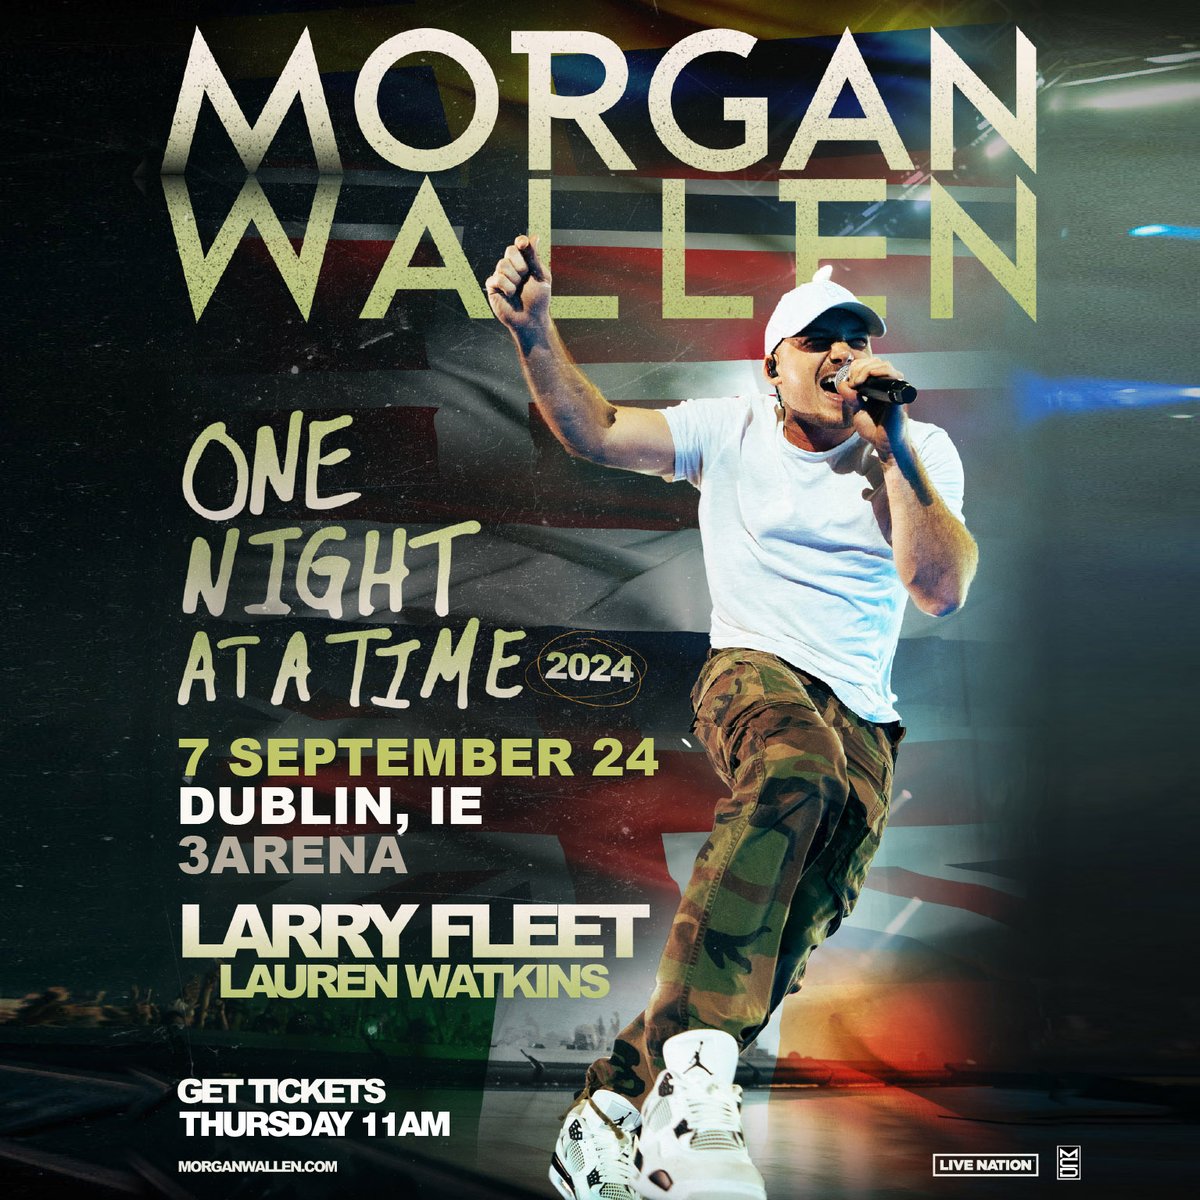 ⚡️ 𝙅𝙐𝙎𝙏 𝘼𝙉𝙉𝙊𝙐𝙉𝘾𝙀𝘿 ✨ Country music superstar @MorganWallen brings One Night at a Time tour to @3arenadublin on Saturday 7th September 🎟️MCD PRESALE: bit.ly/Morgan-Wallen-…